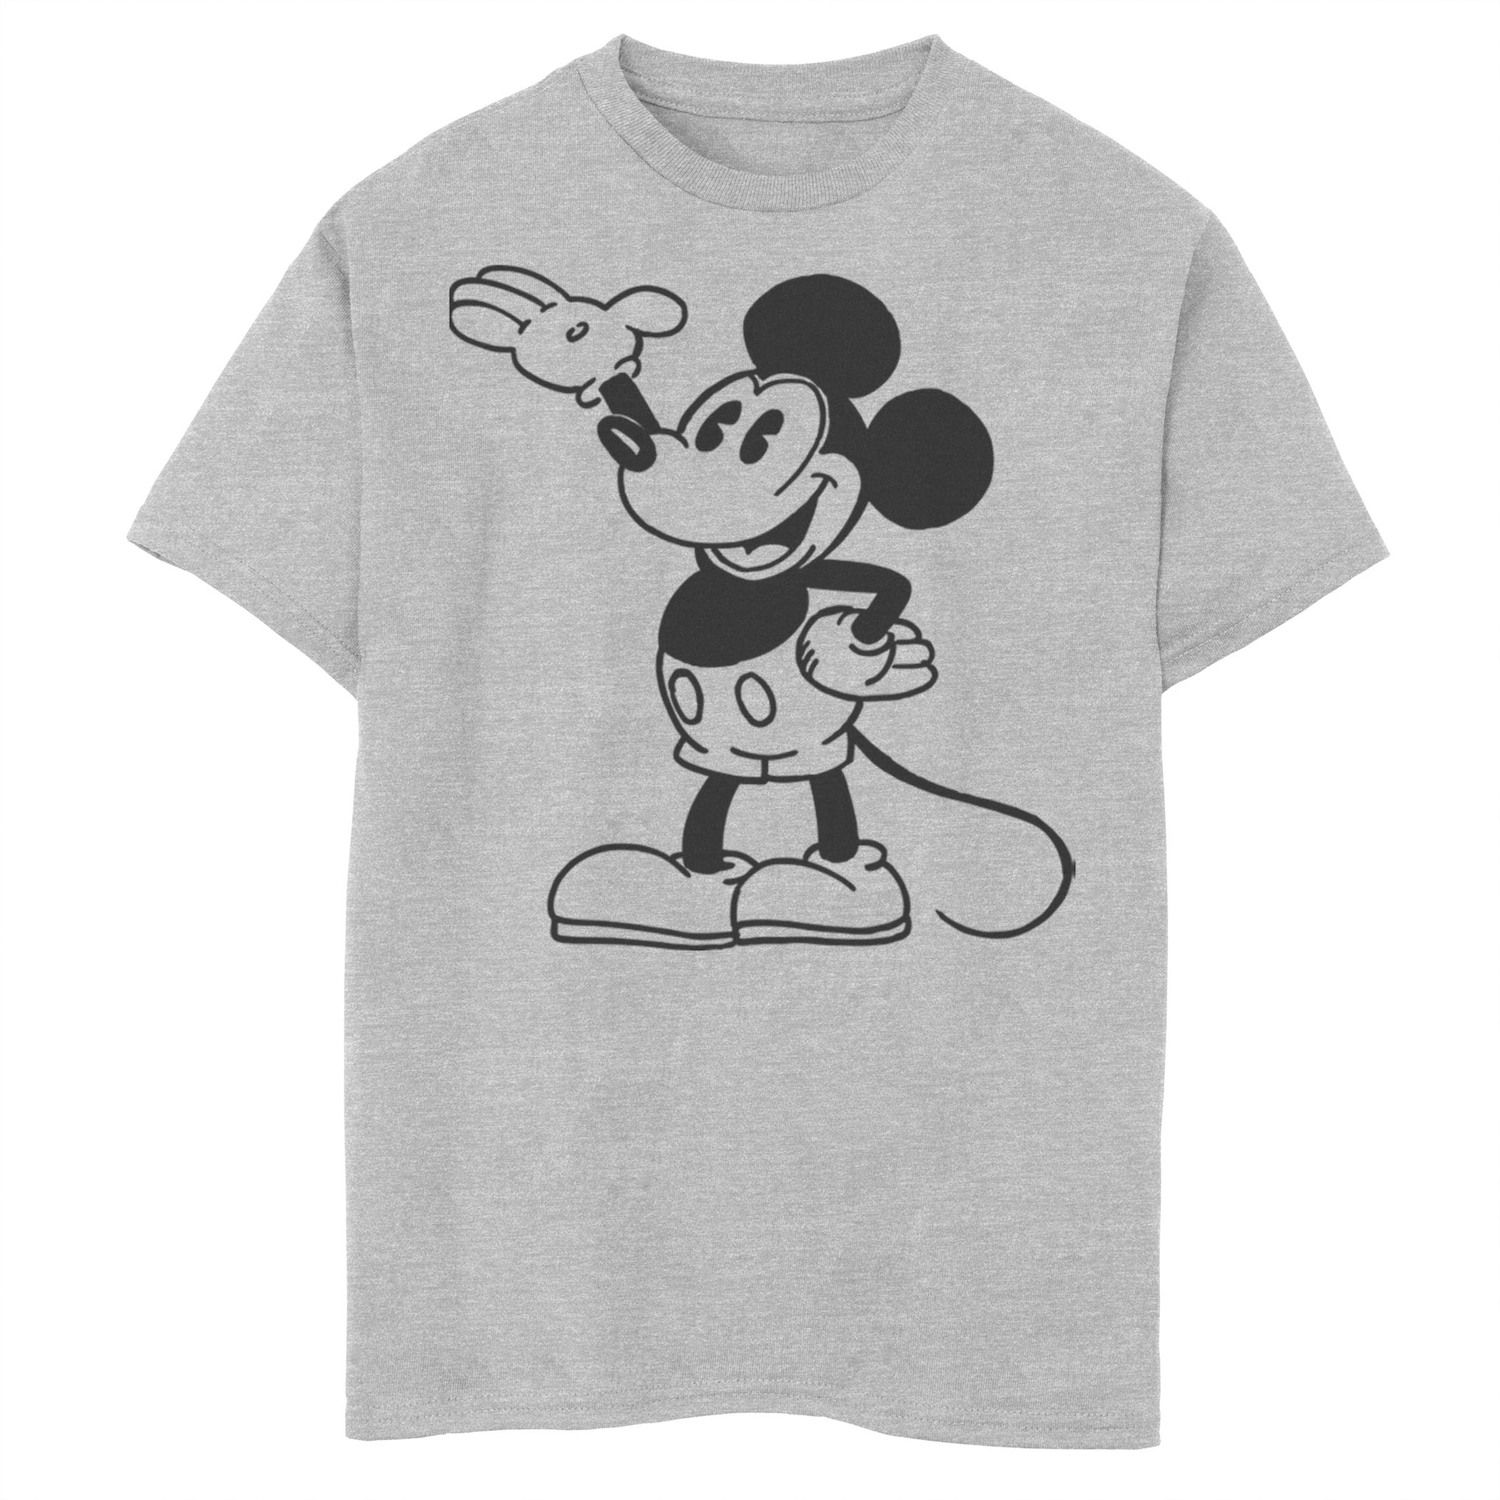 Image for Disney 's Mickey Mouse Boys 8-20 Original Sketch Graphic Tee at Kohl's.